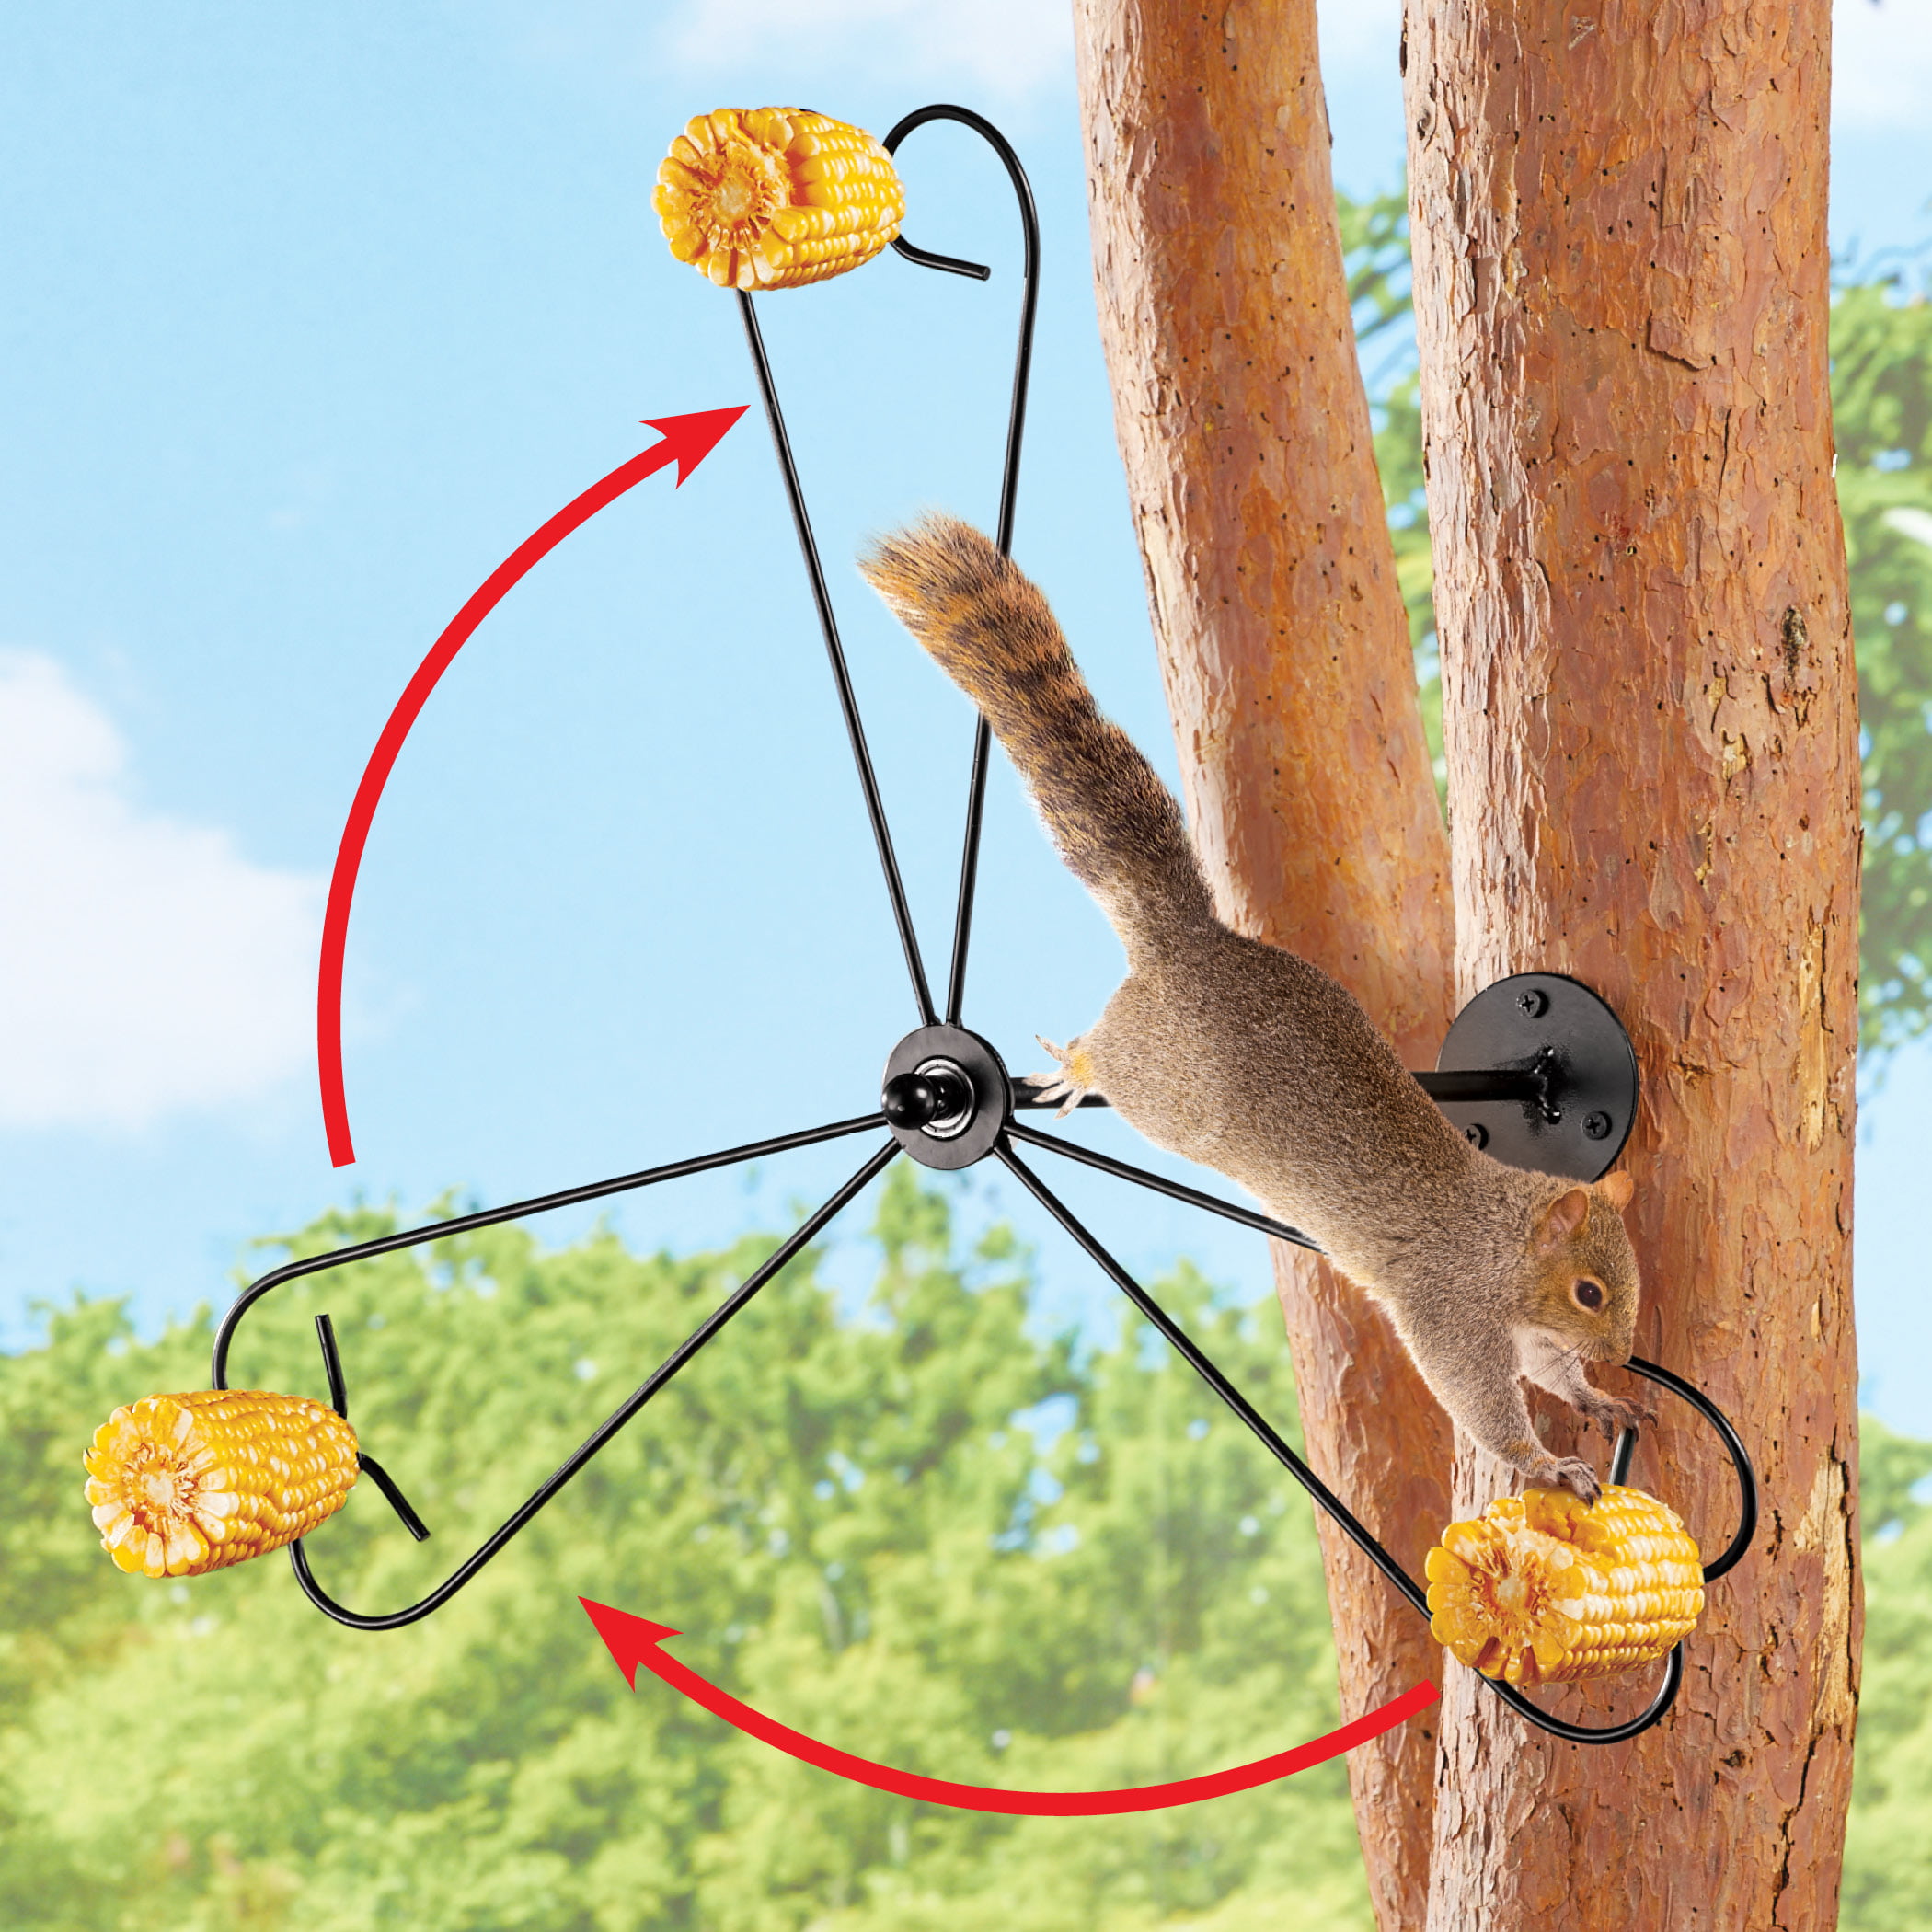 Iron Spinning Squirrel Feeder with Notches to Mount Corn on the Cob at